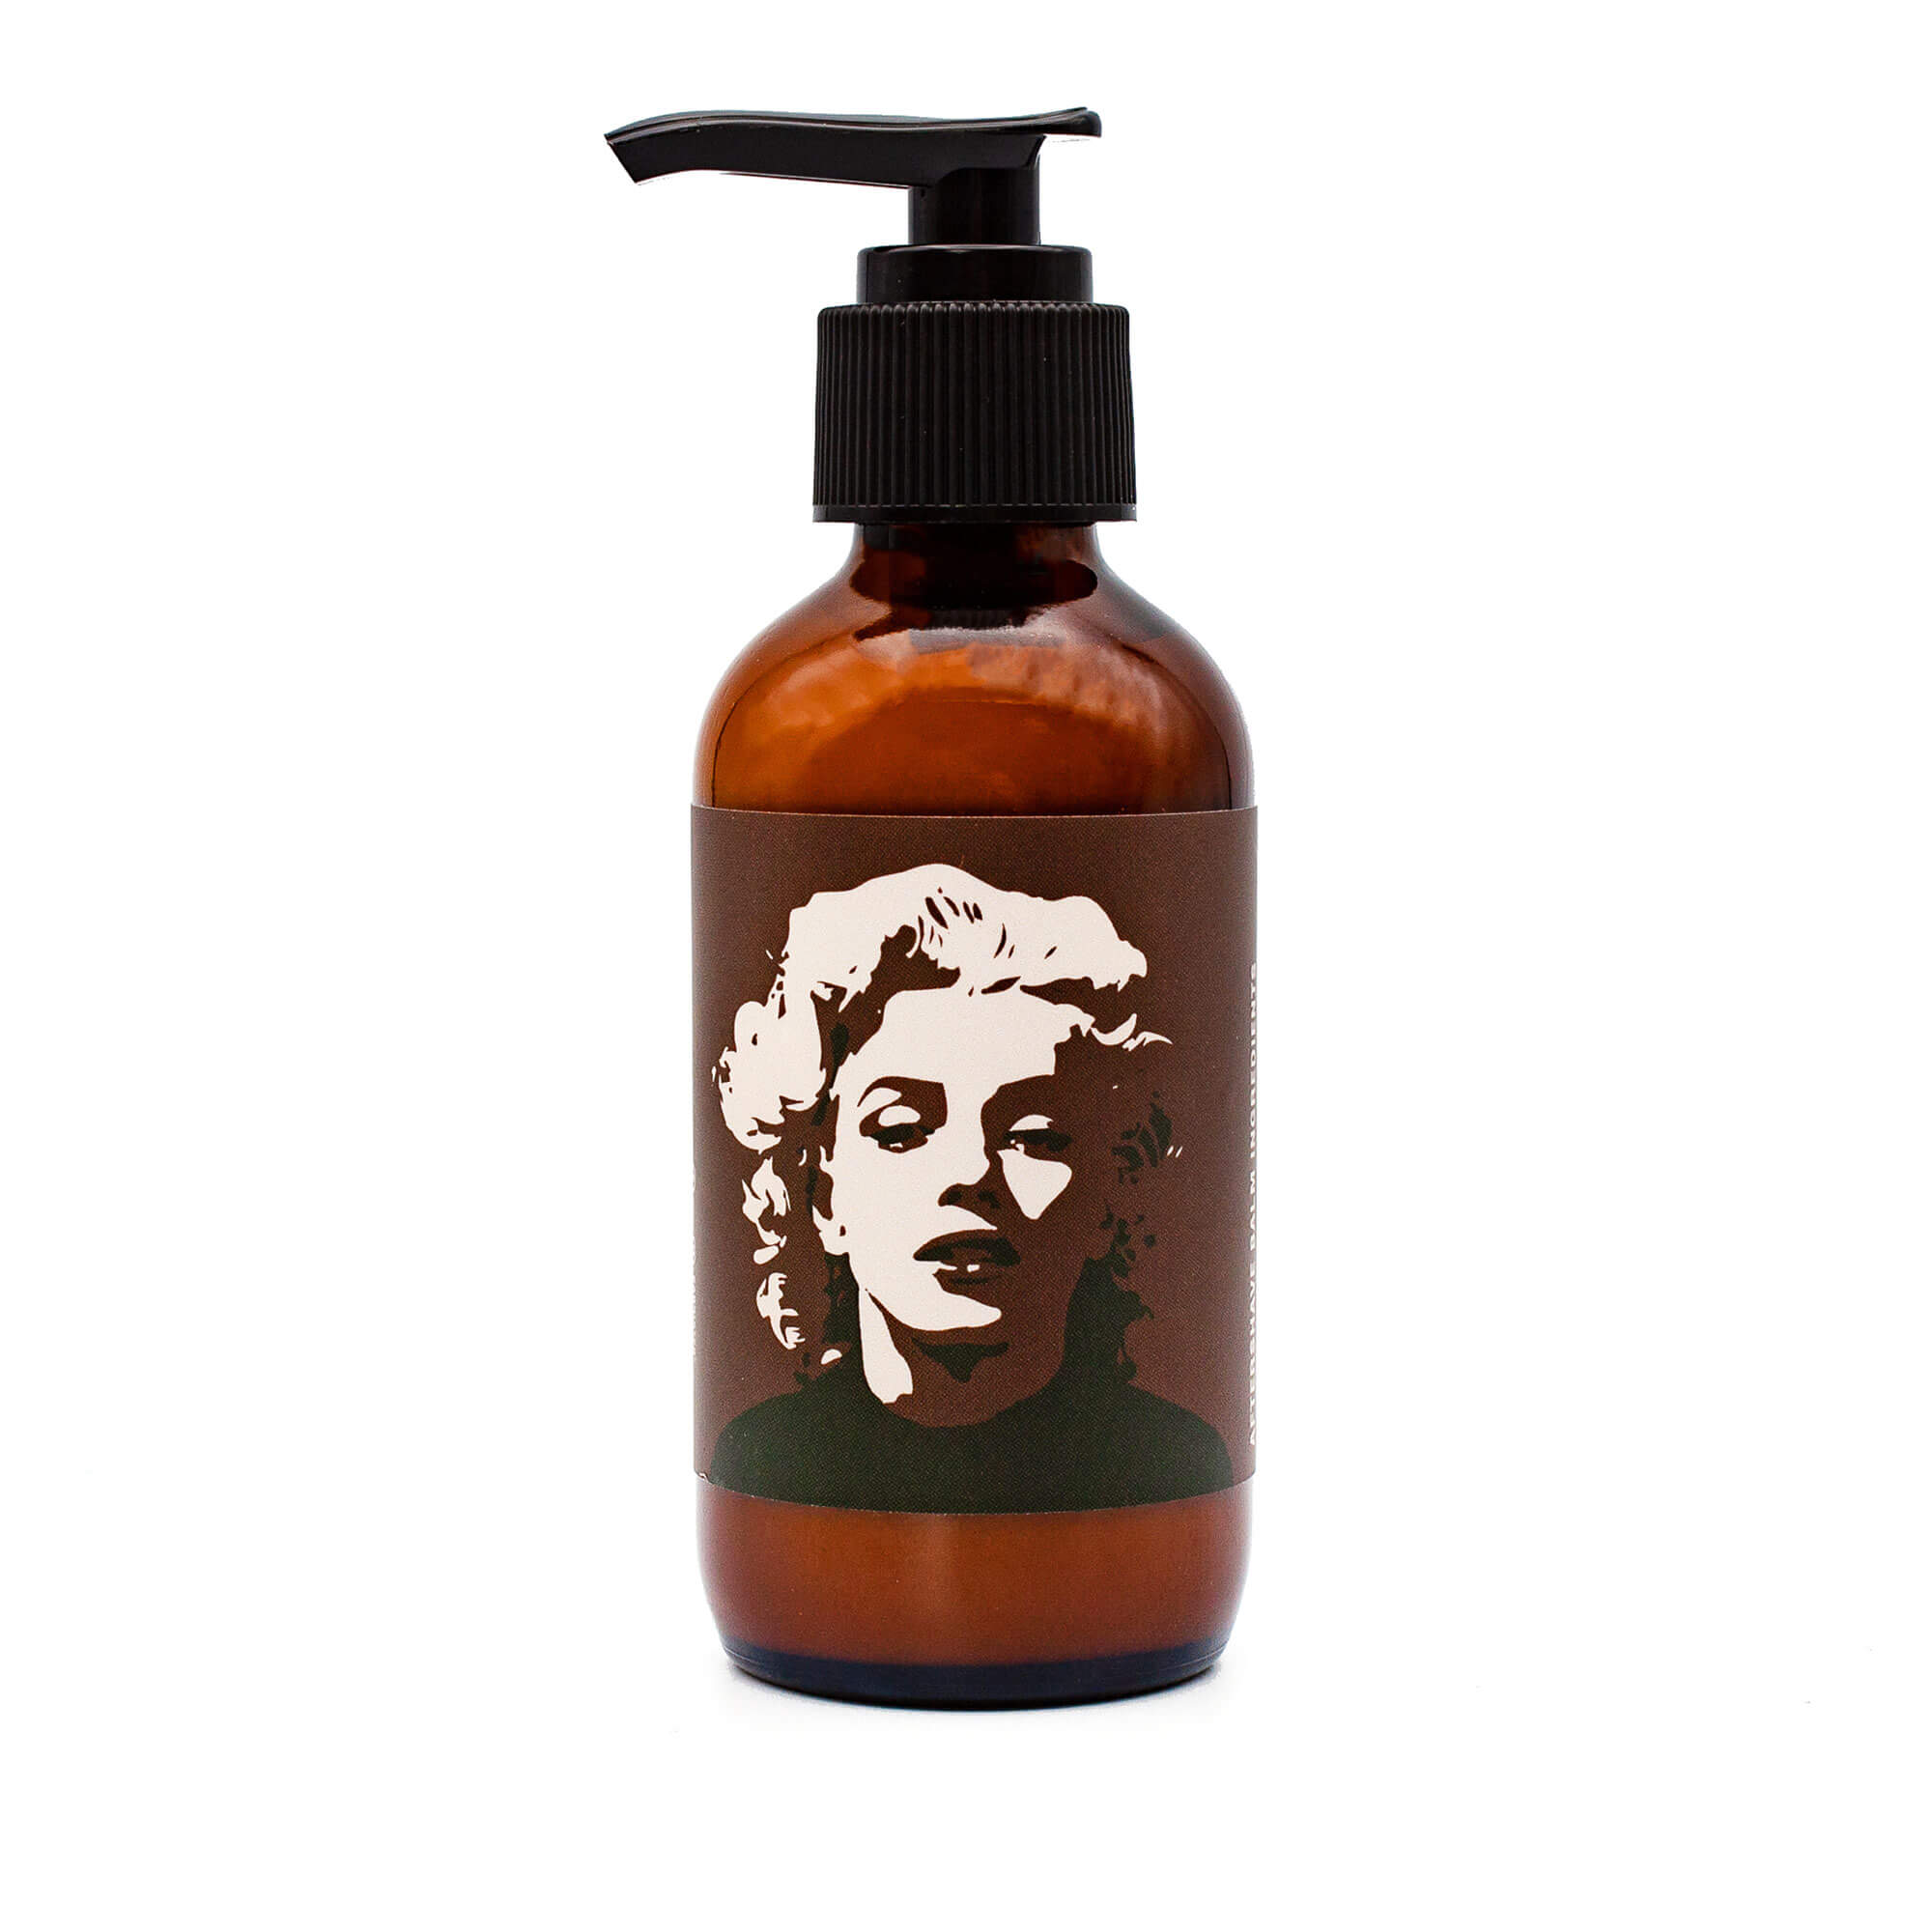 Barrister and Mann Marilyn Aftershave Balm